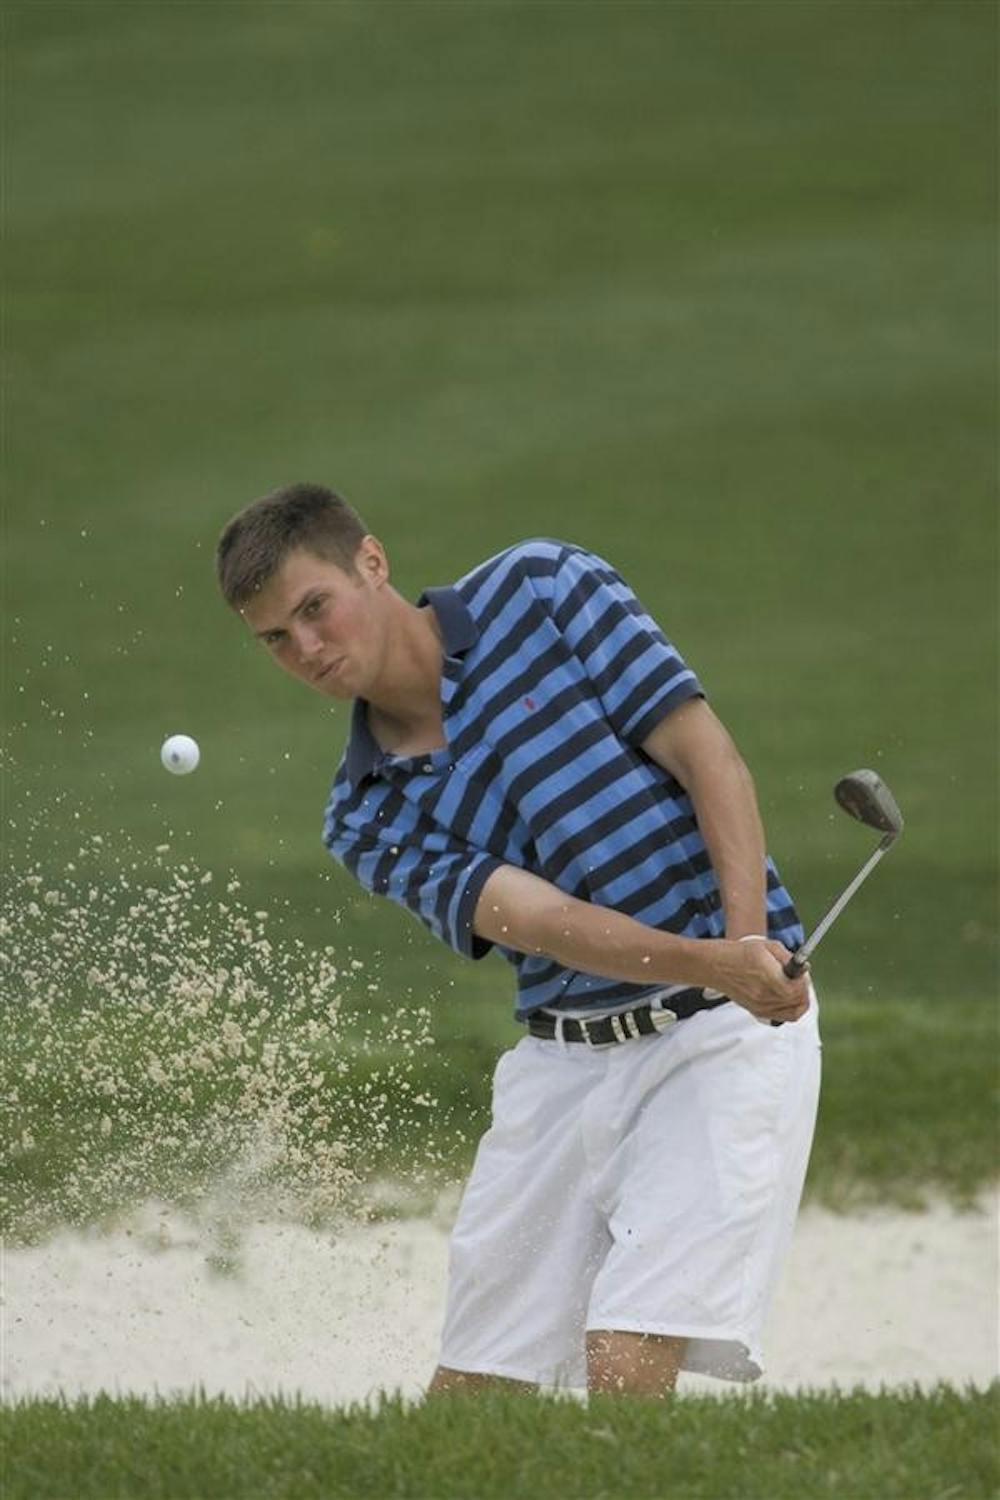 Golfer Jeff Overton practices hitting balls out of the sand trap Apr. 21, 2005, at the IU Public Golf Course. Overton has earned $3,456,356 in PGA Tour winnings this year, bringing his PGA career total to $7,126,953.